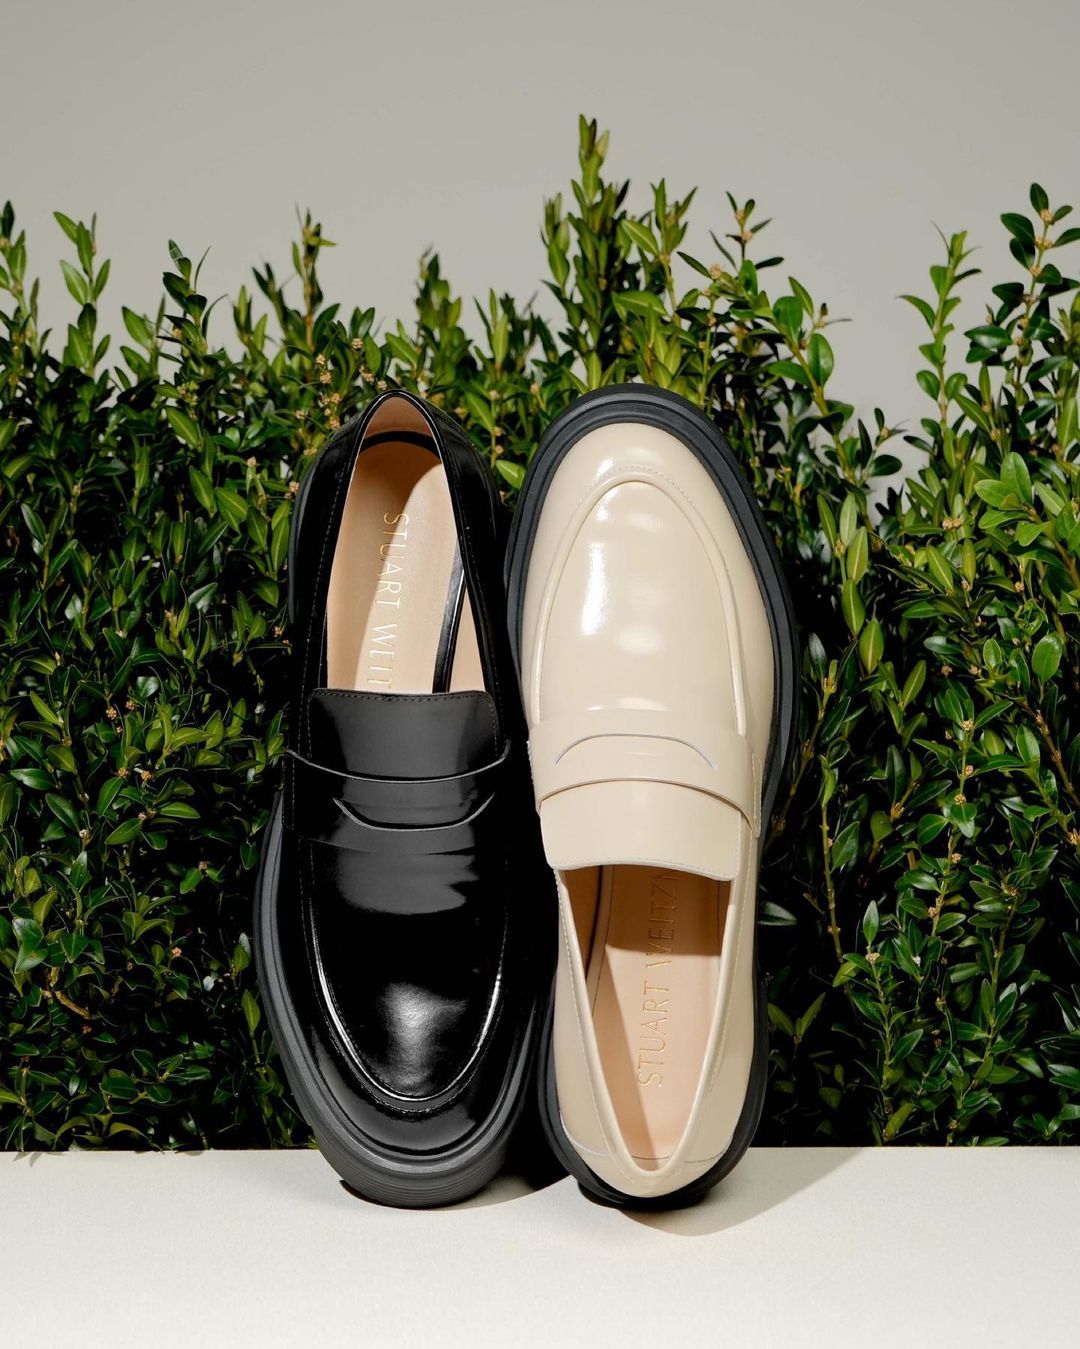 image of two pairs of stuart weitzman loafers. the one on the left is black and the one on the right is cream.